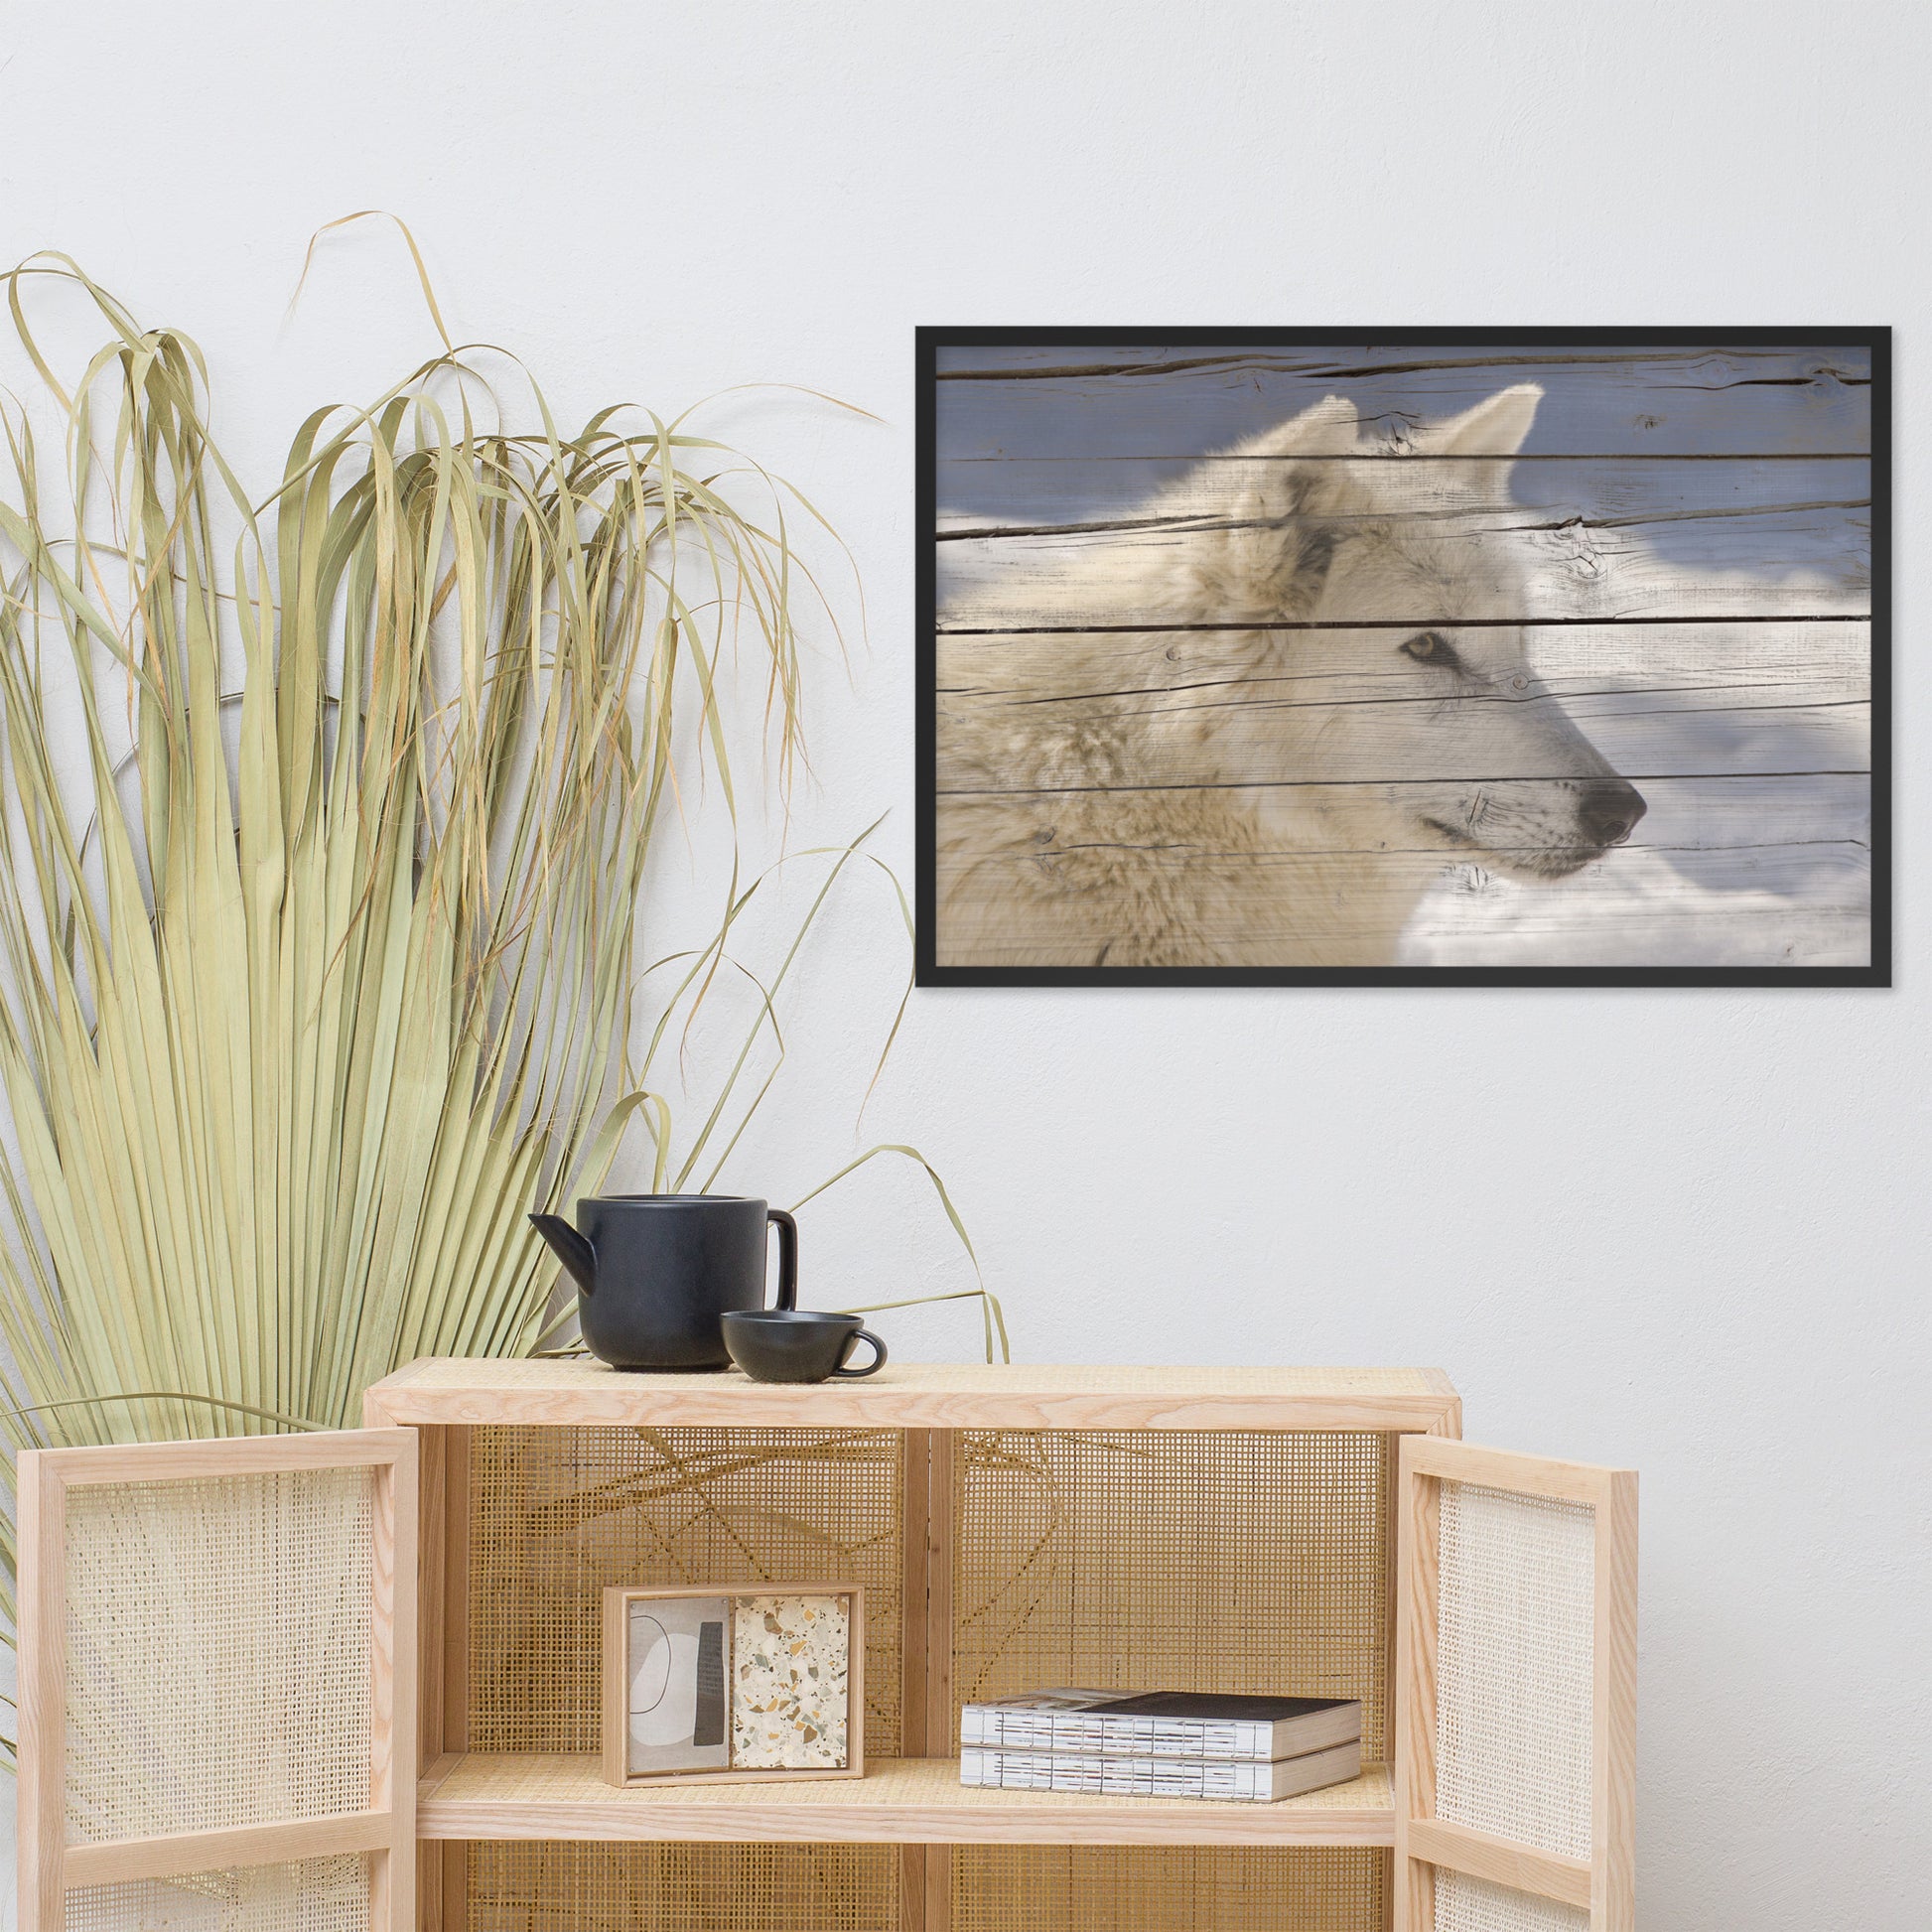 Large Artwork For Hallway: Aries the White Wolf Portrait on Faux Weathered Wood Texture / Animal / Wildlife / Nature Photographic Artwork - Framed Artwork - Wall Decor